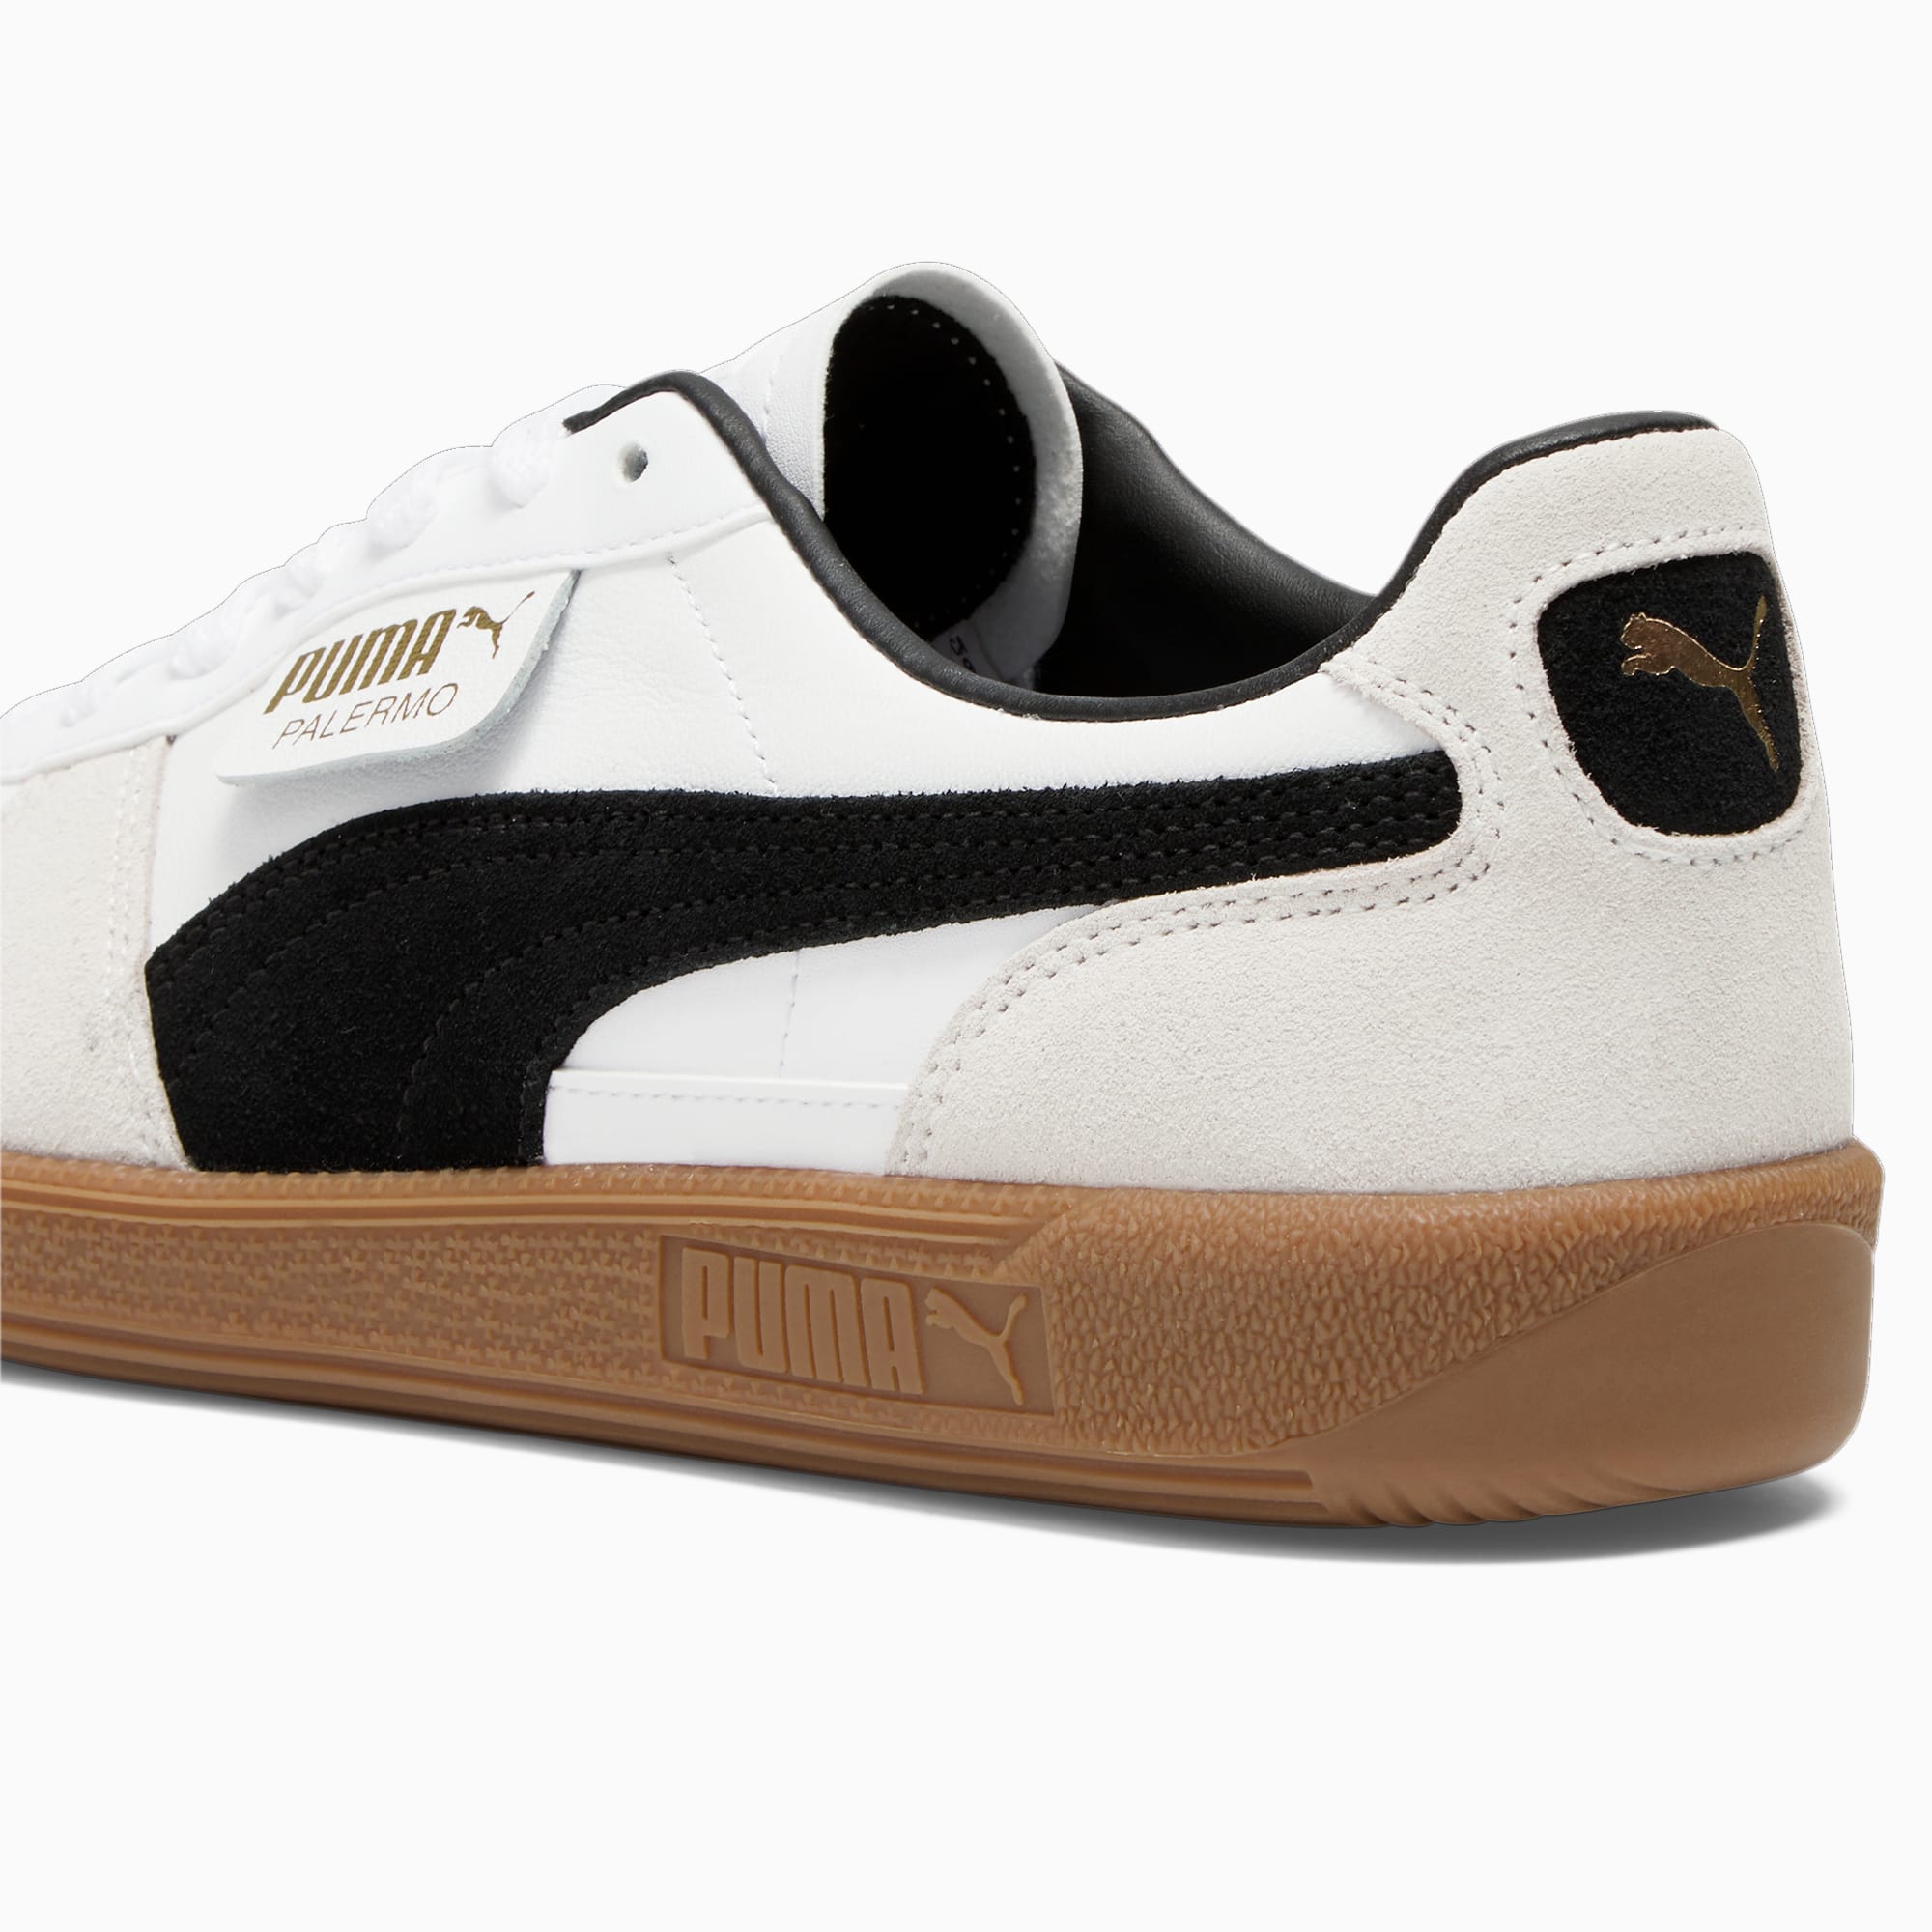 PUMA PALERMO OG (38301106) - Classic Style, Timeless Comfort